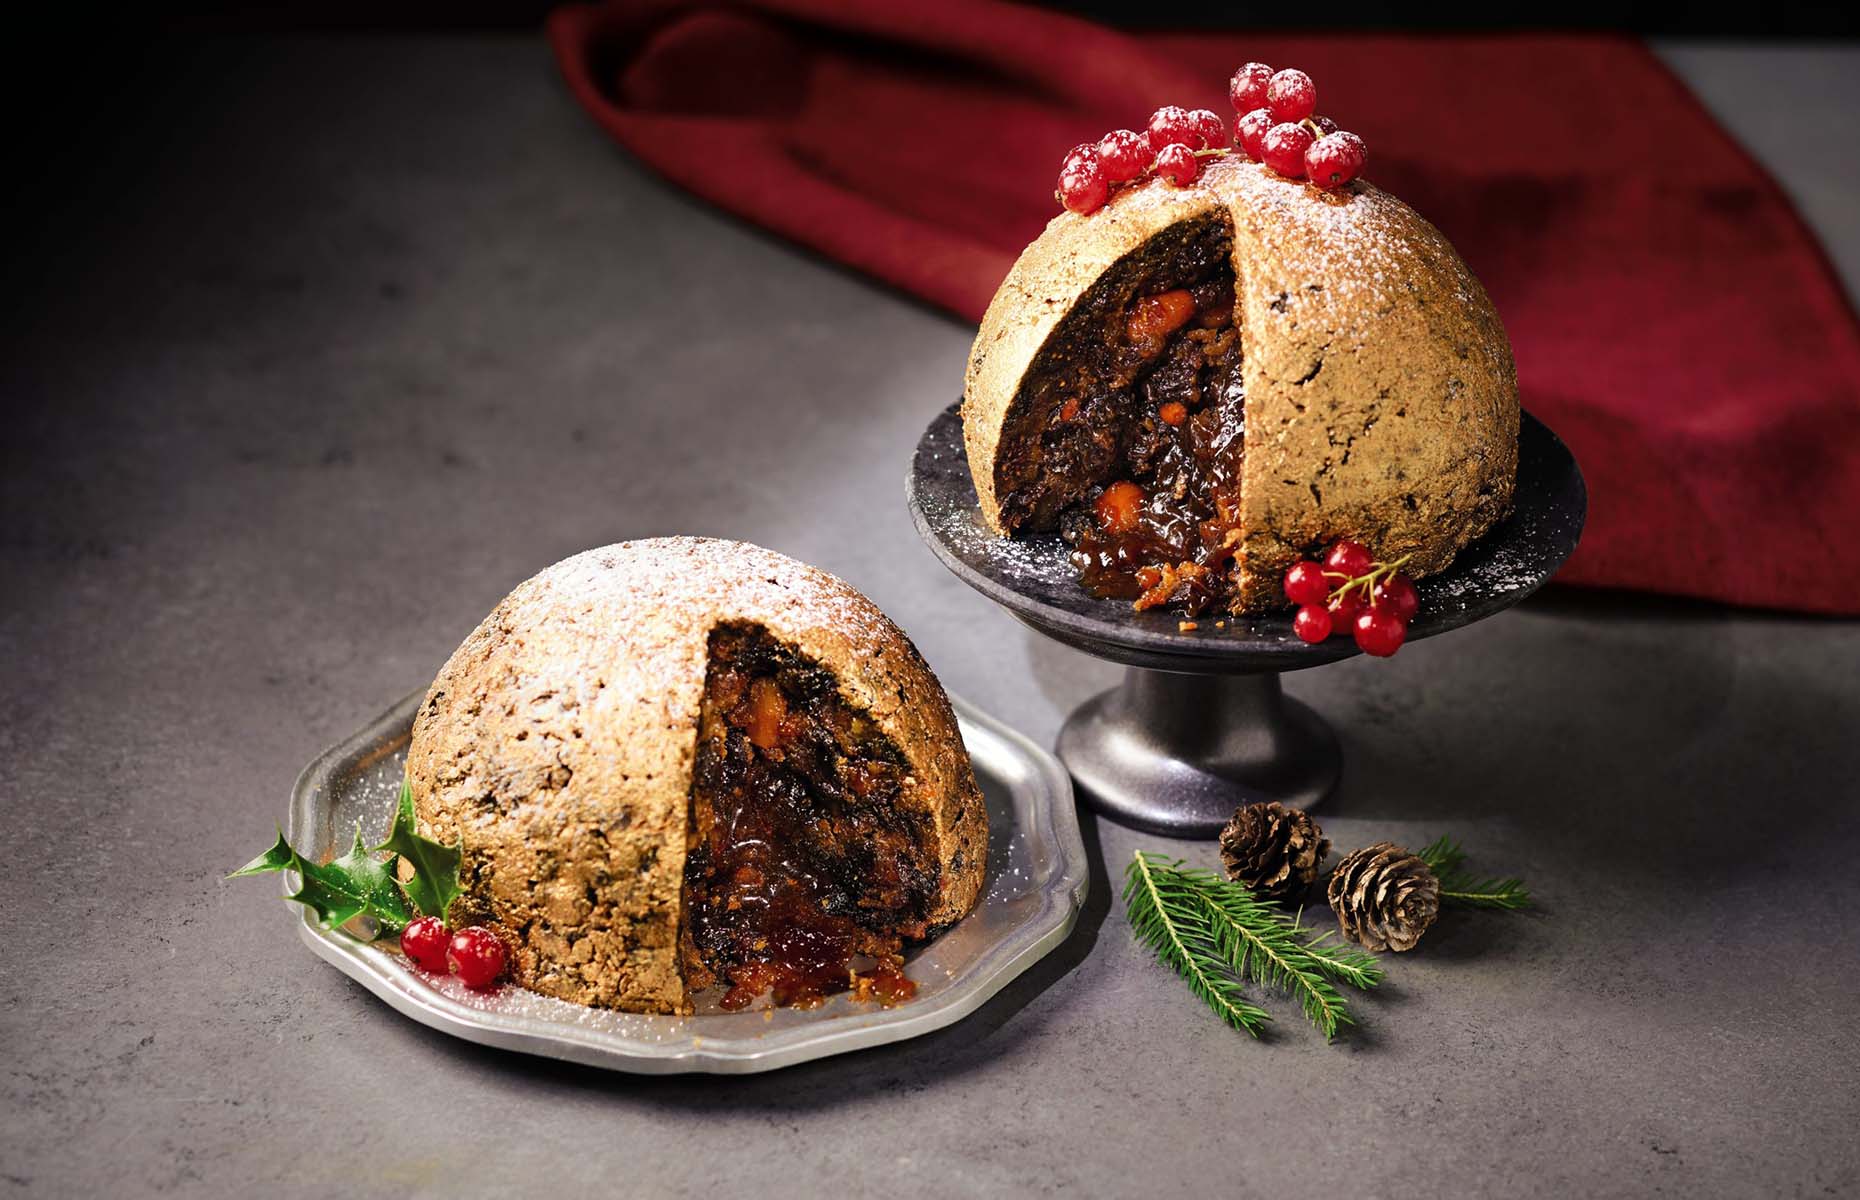 Aldi Specially Selected damson plum and pink gin Christmas pudding 2021